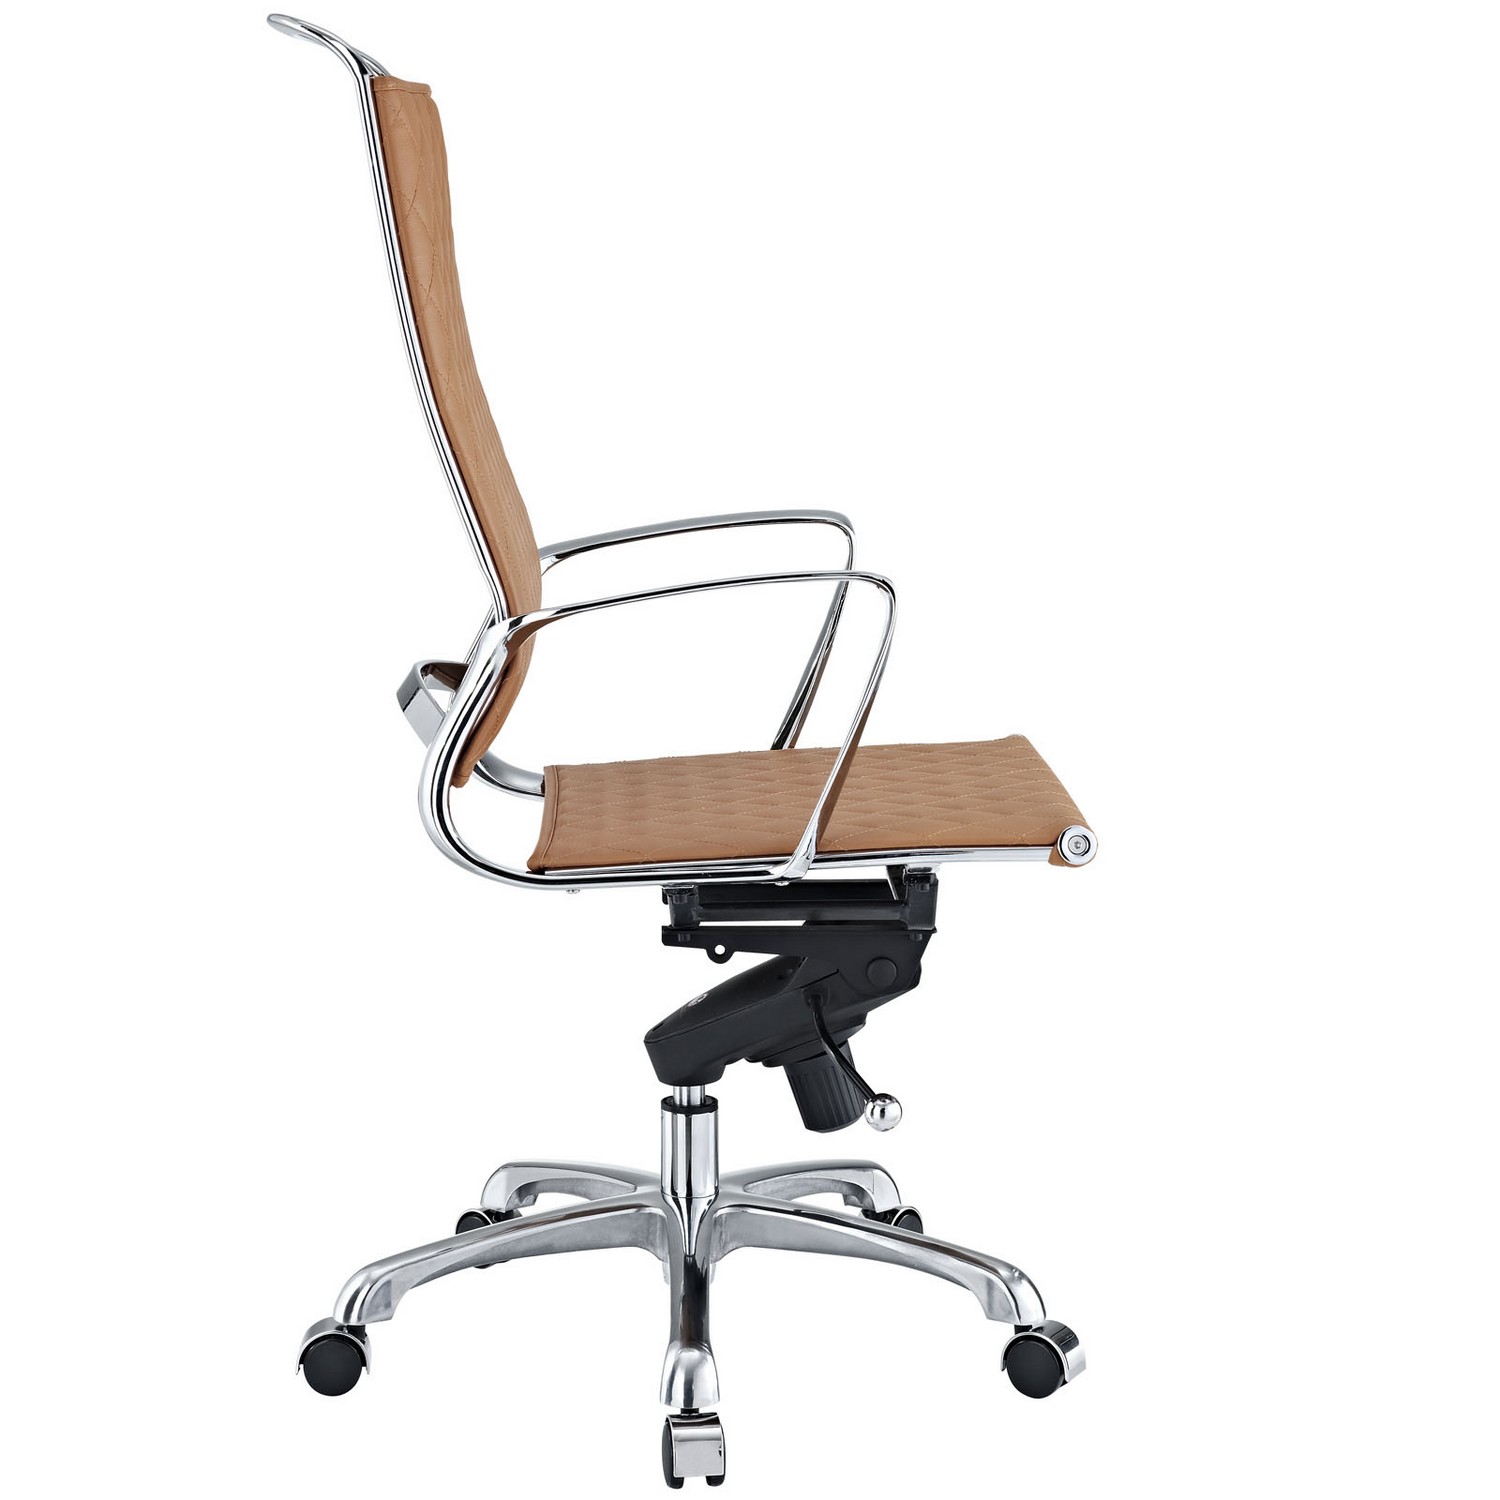 Modway Vibe Highback Office Chair - Tan